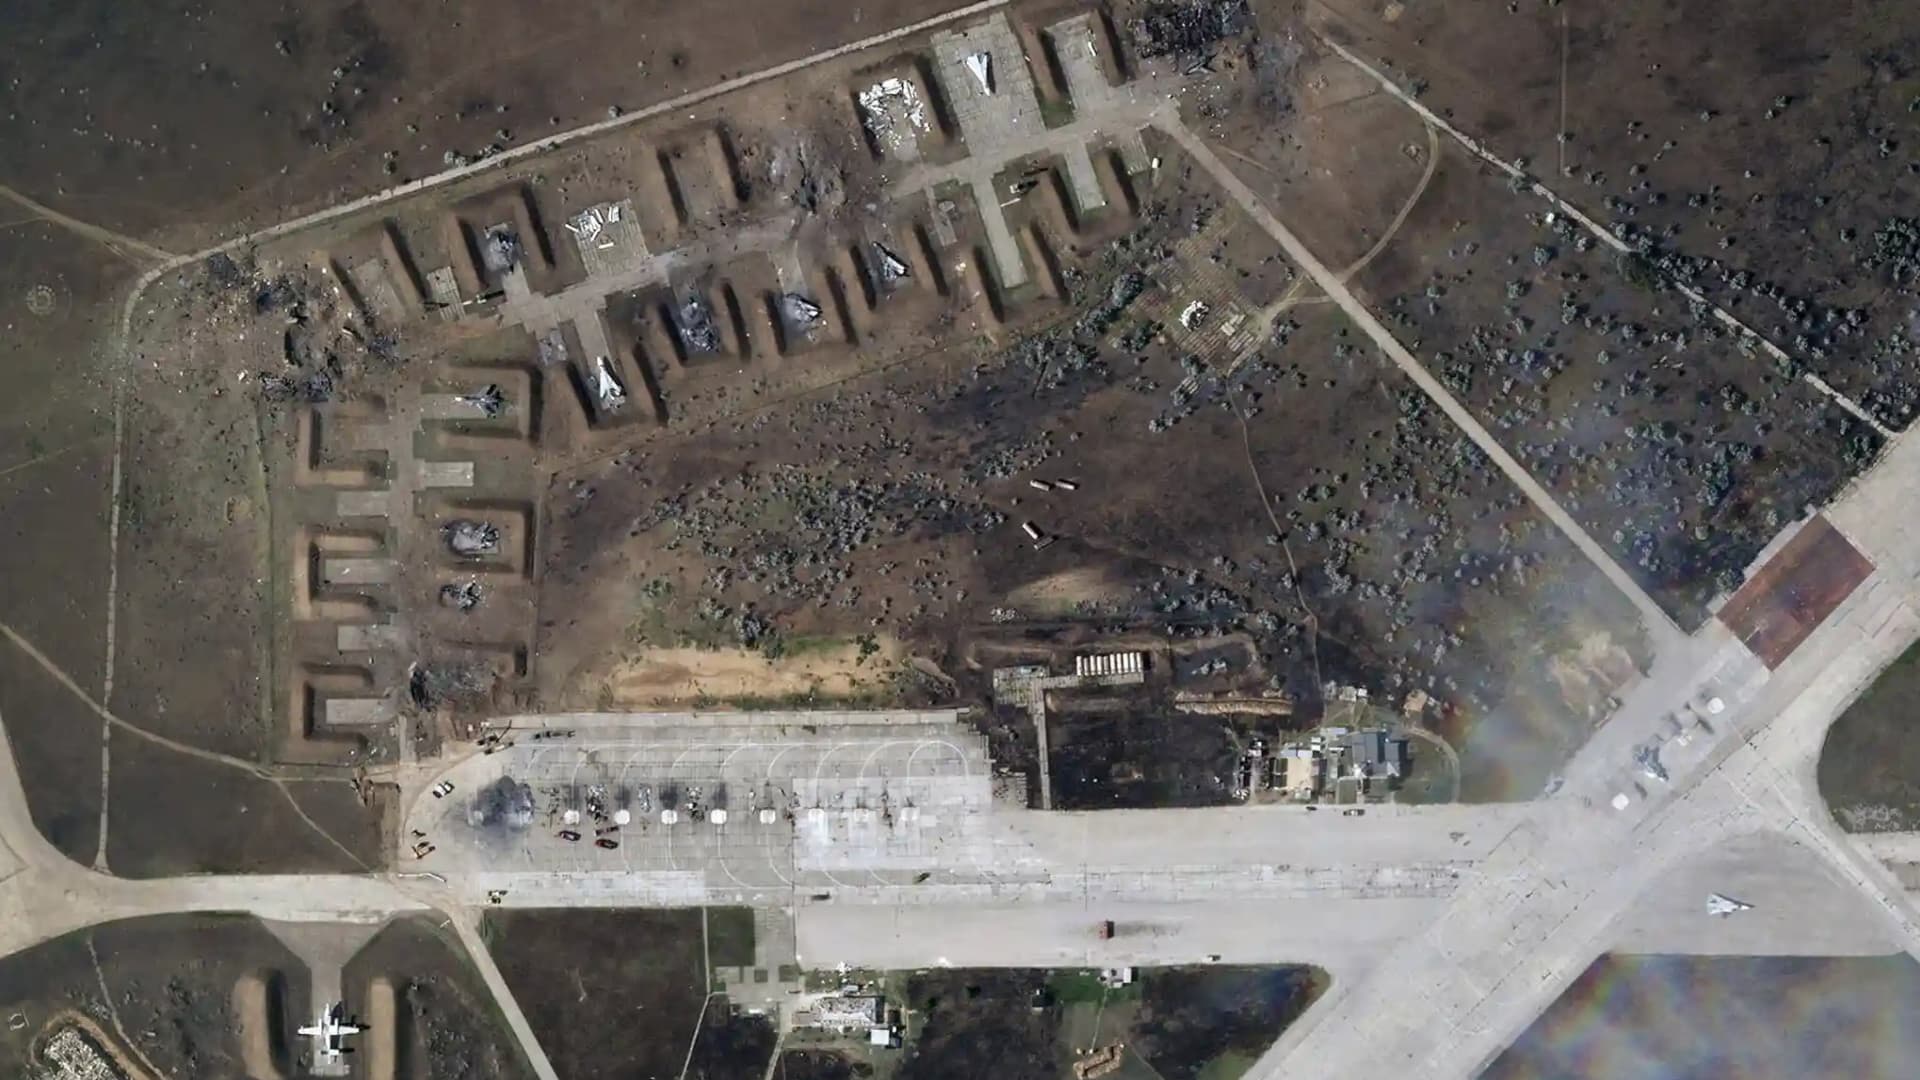 A satellite image provided by Planet Labs shows destroyed Russian aircraft at Saky airbase in Crimea after an explosion on Aug. 9th, 2022.